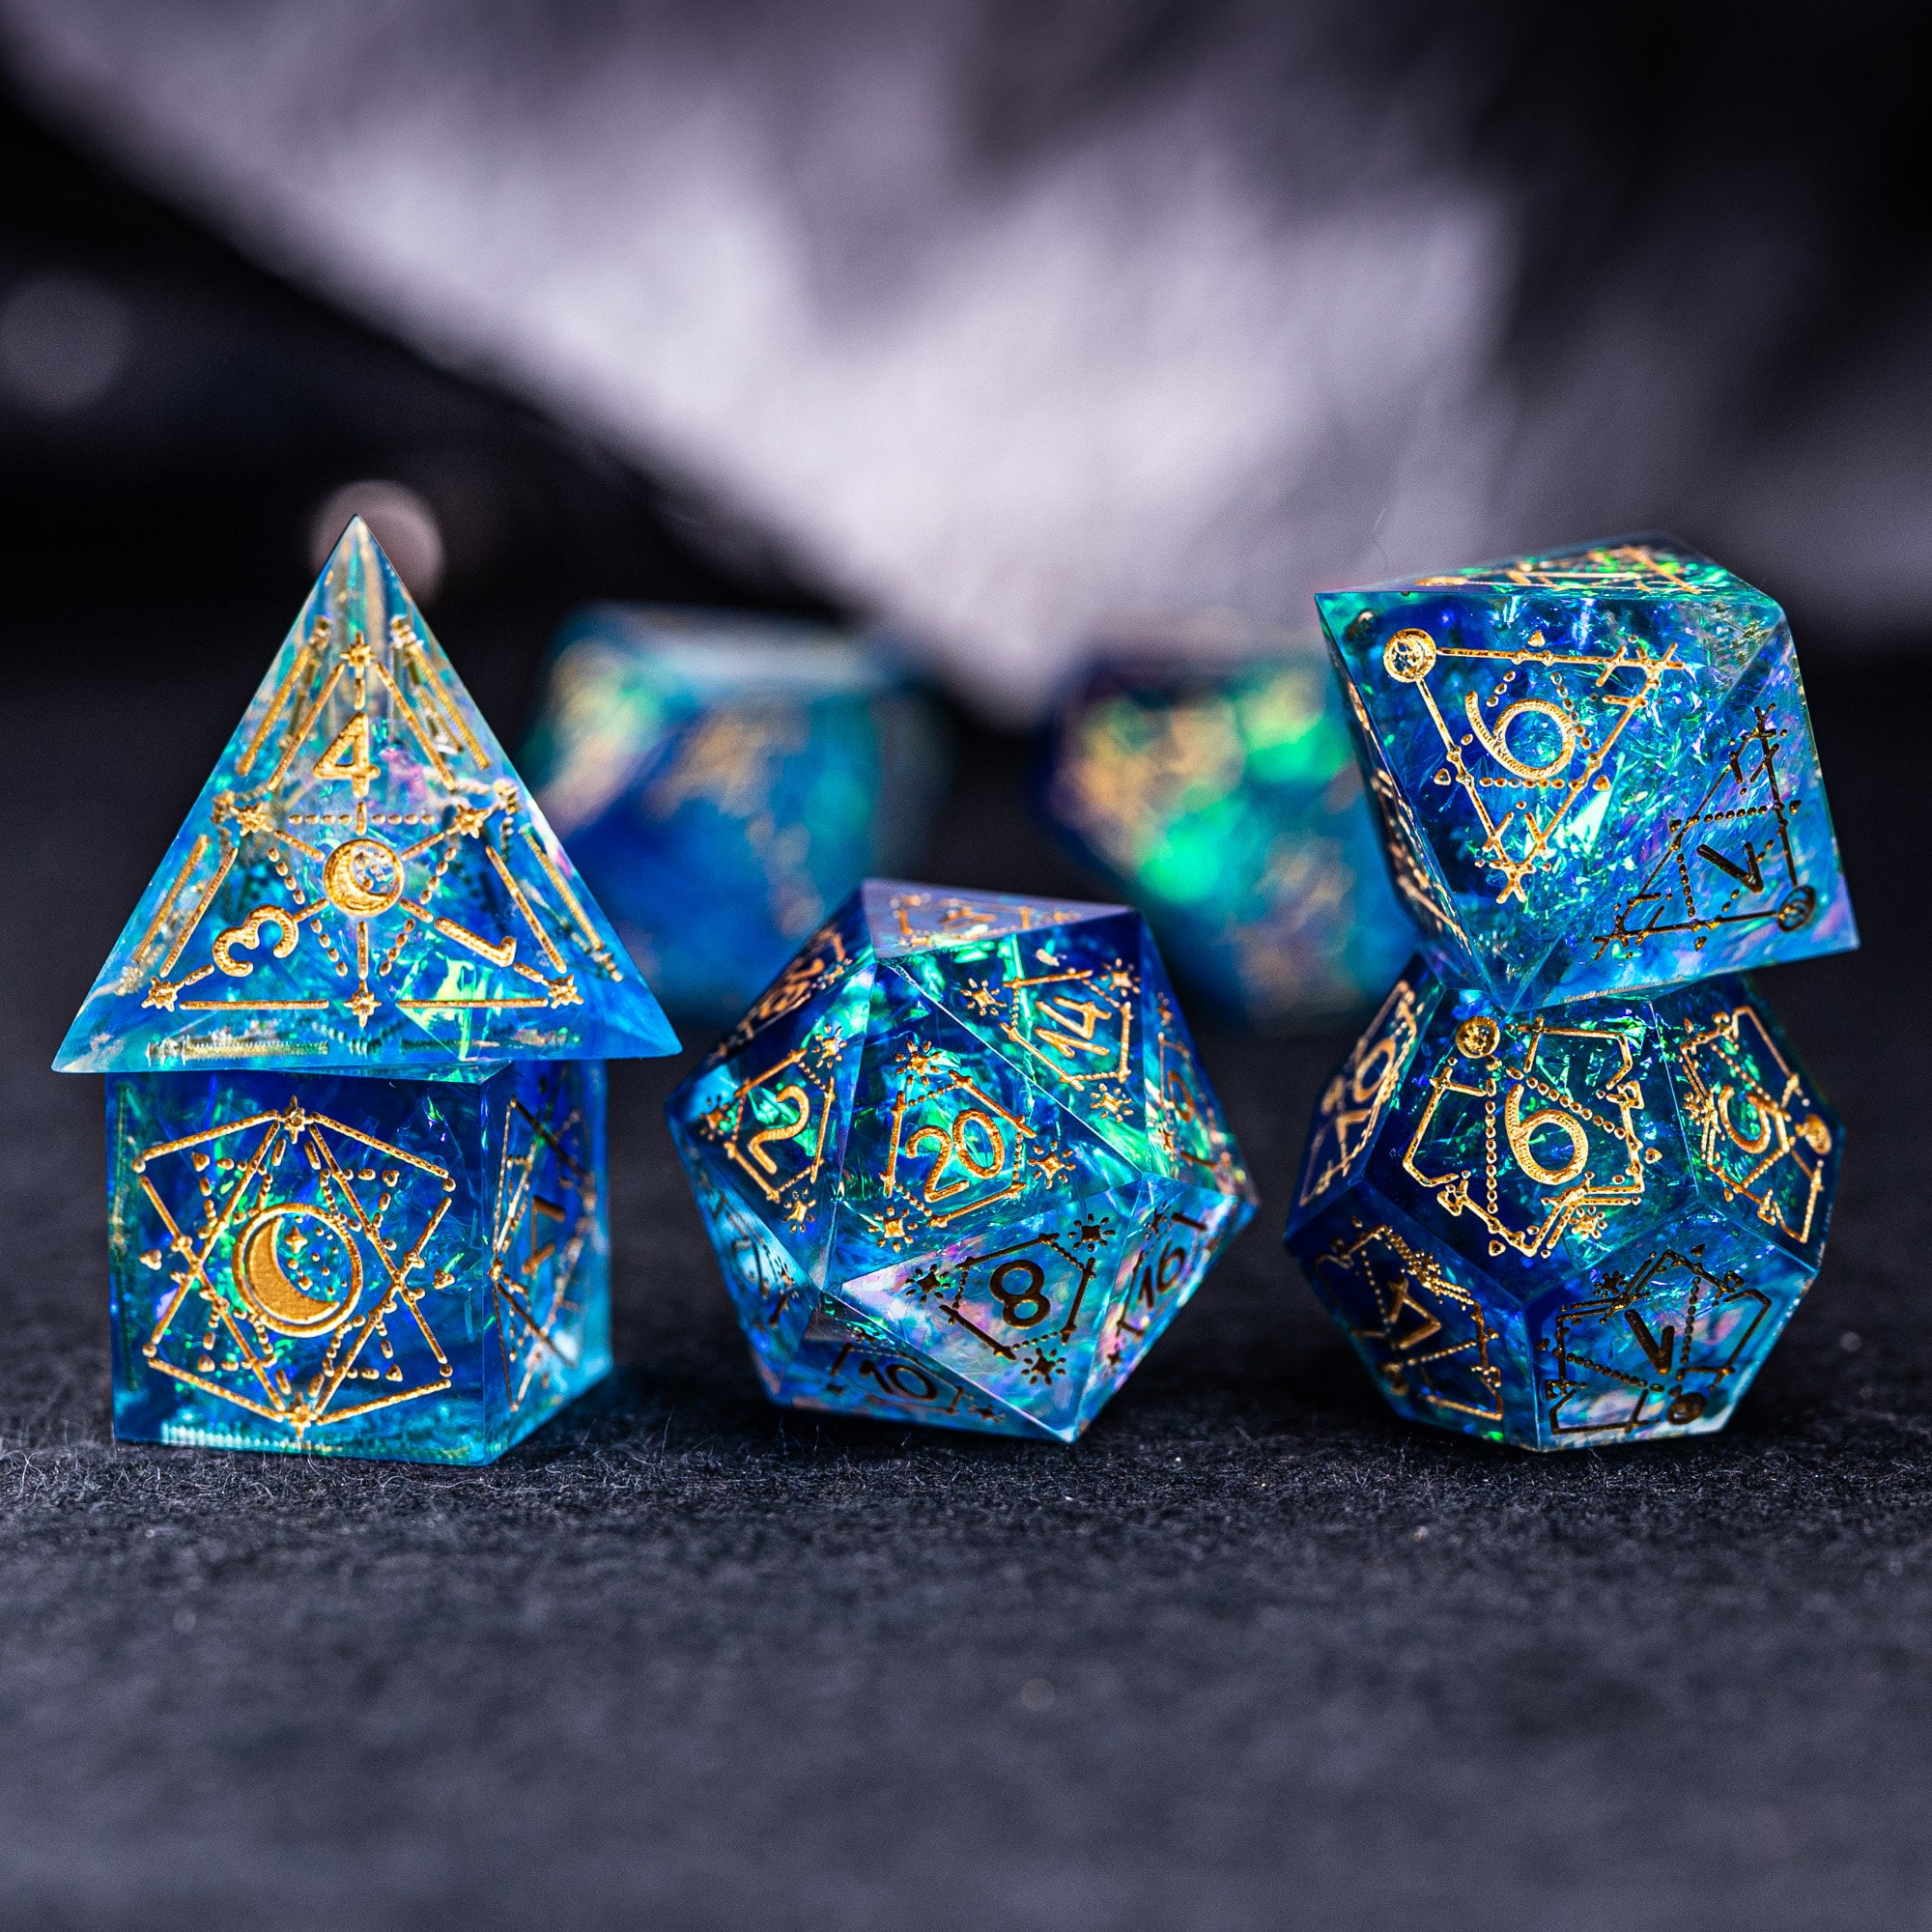 DND Dice Set RPG Role Playing Warhammer Flower D&D Dice Set for Dungeons and Dragons Accessories D+D Polyhedral Dice Set D20 D12 D10 D8 D6 D4 RNNFNG Resin Sharp Edge Dice with Box 